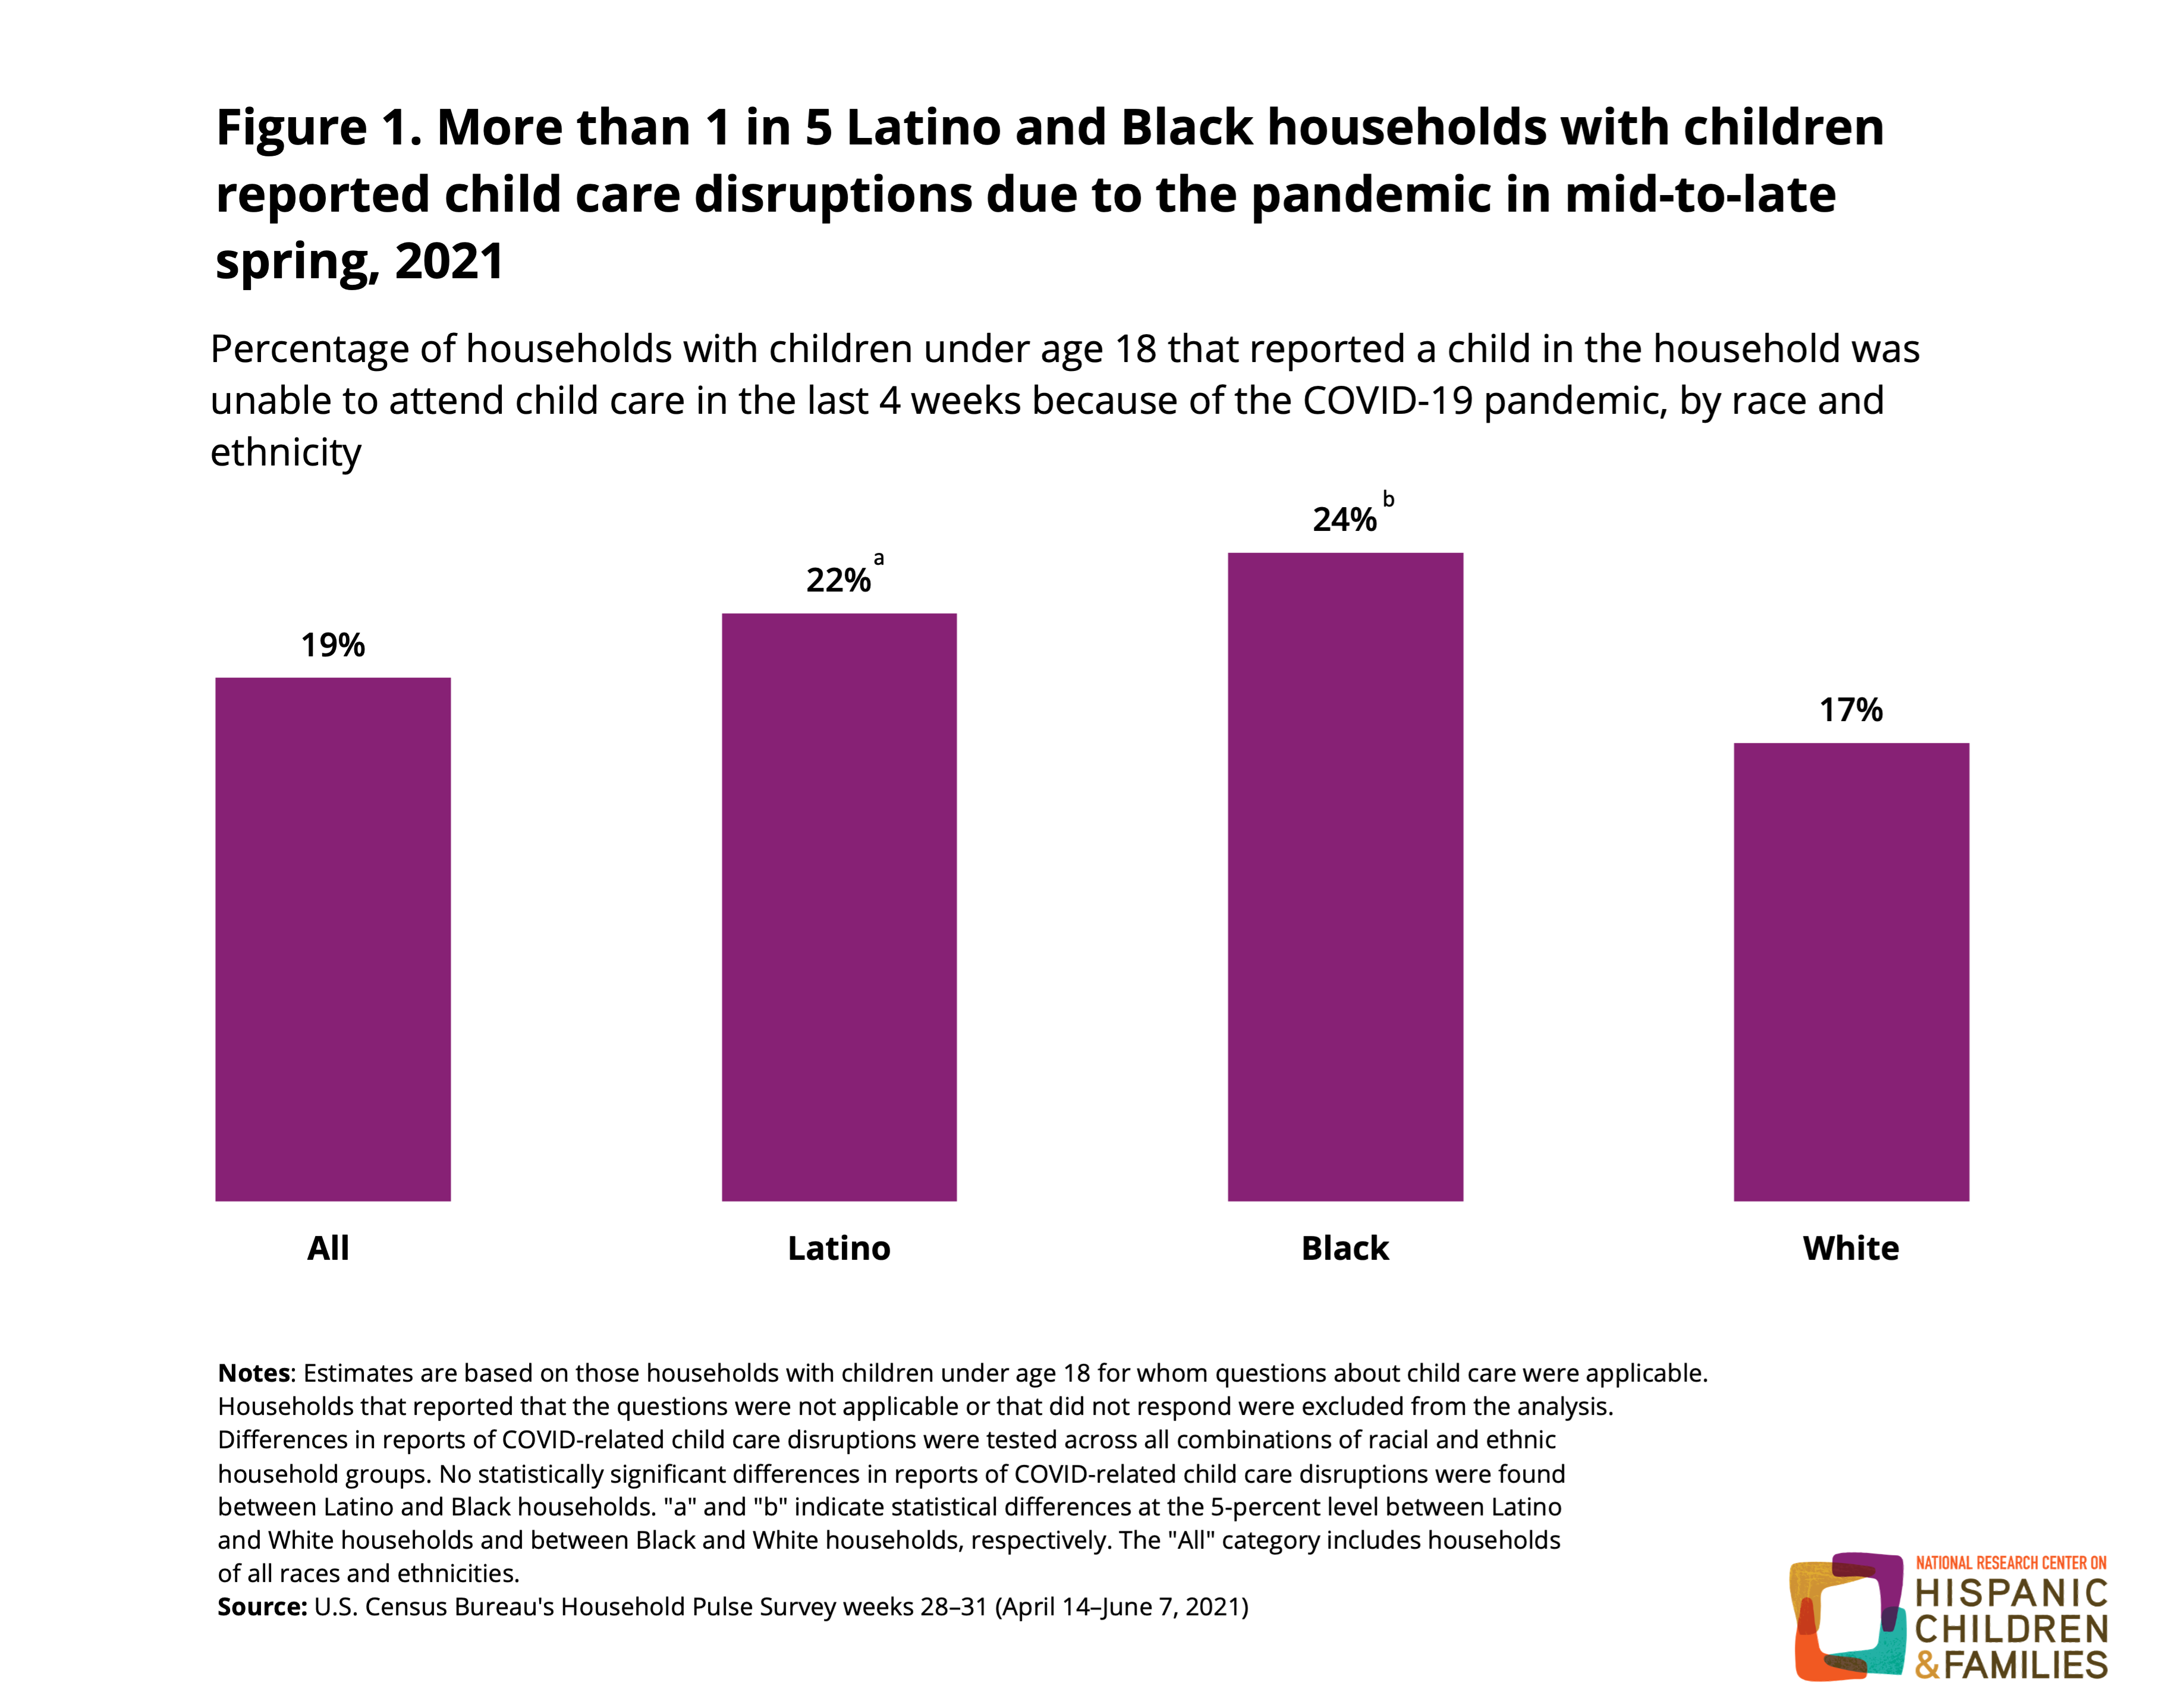 Figure 1: More than 1 in 5 Latino and Black households with children reported child care disruptions due to the pandemic in mid-to-late spring, 2021